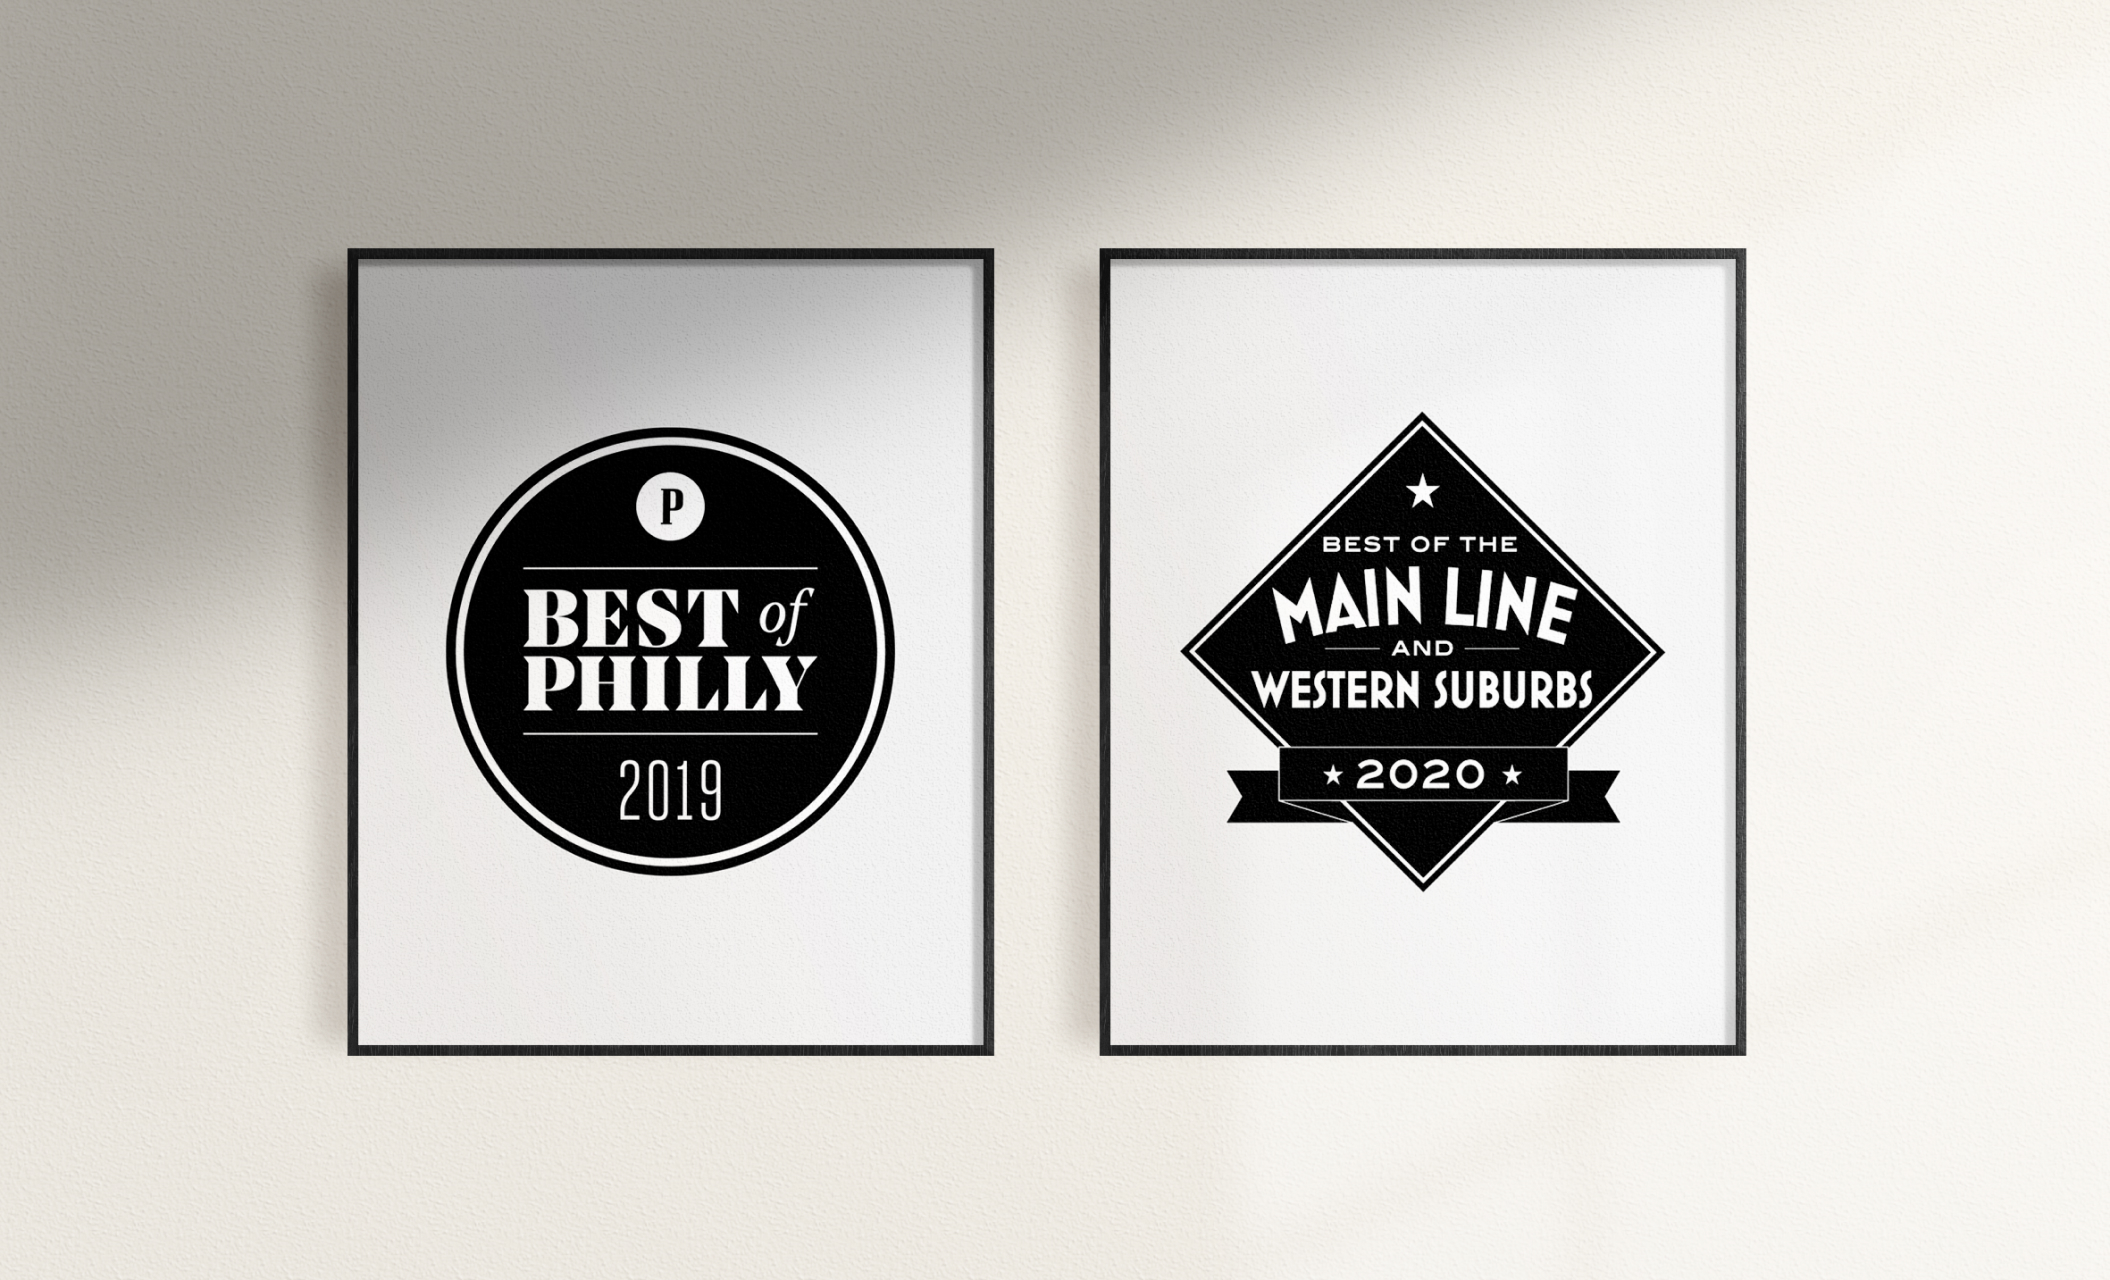 Awards for Best of Philly and Best of the Main Line and Western Suburbs